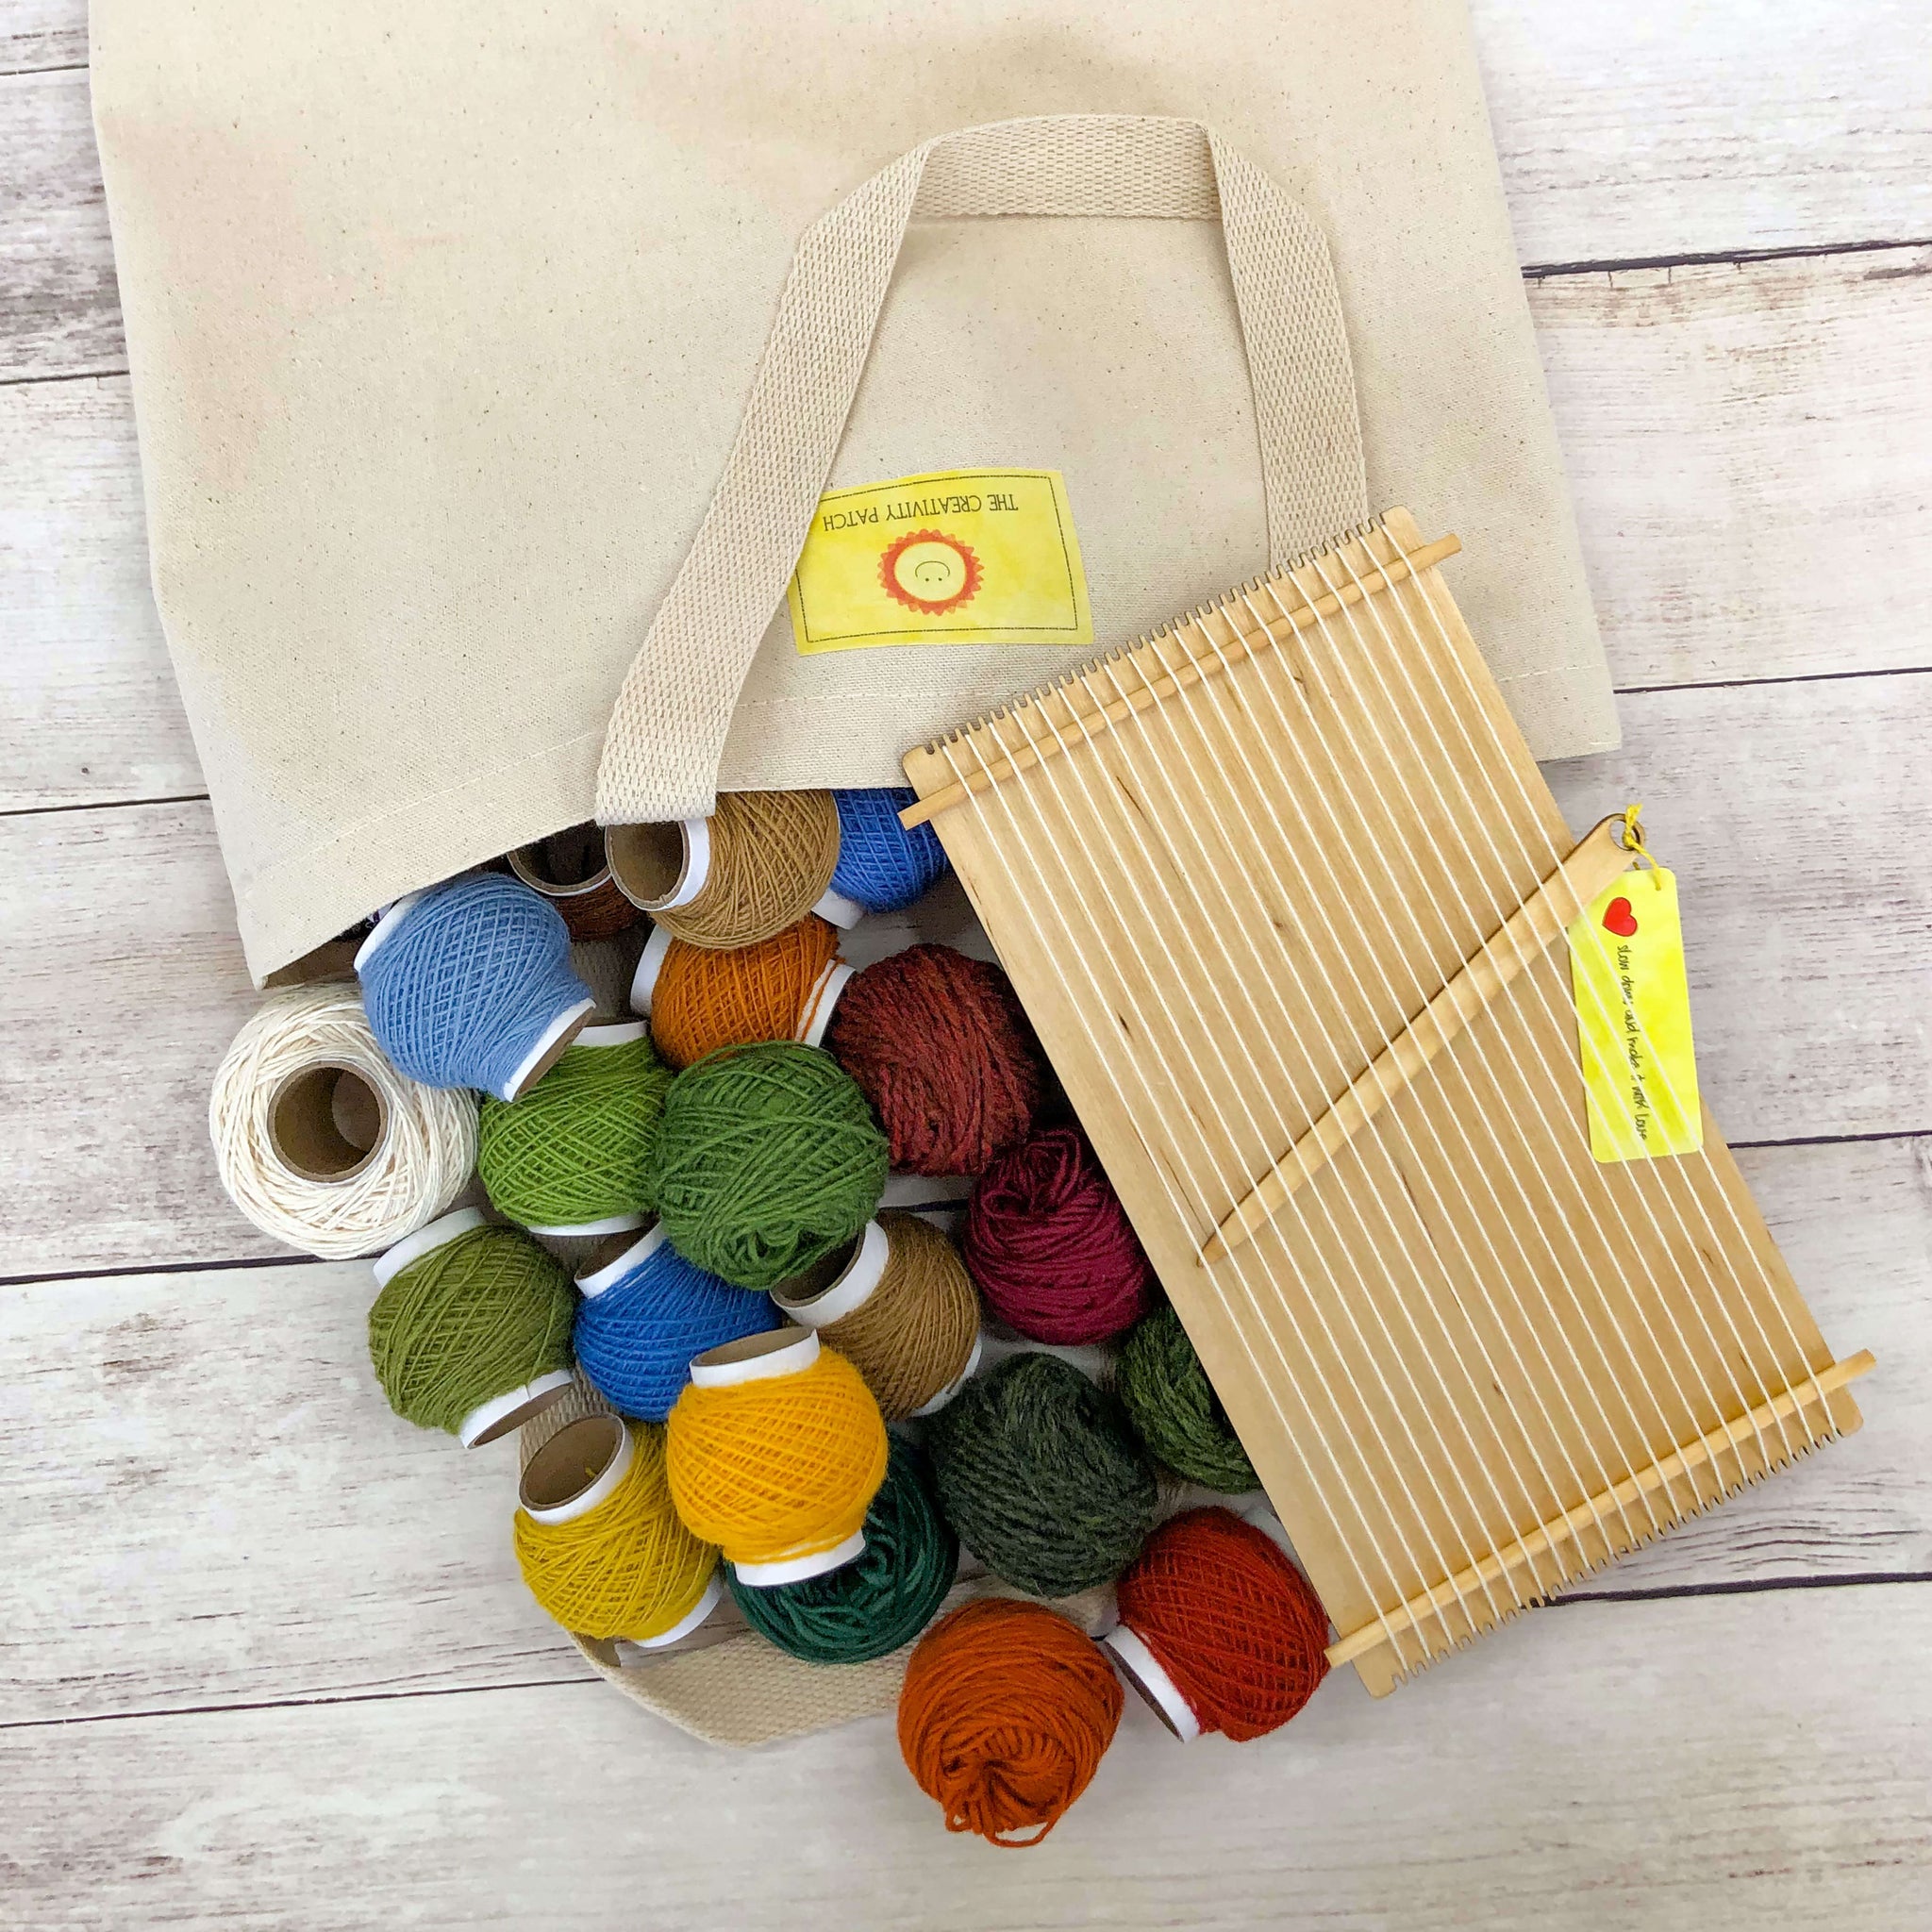 Wood Loom Weaving Kit - Wool Yarn in Natural Colors - The Creativity Patch  - Lucy Jennings